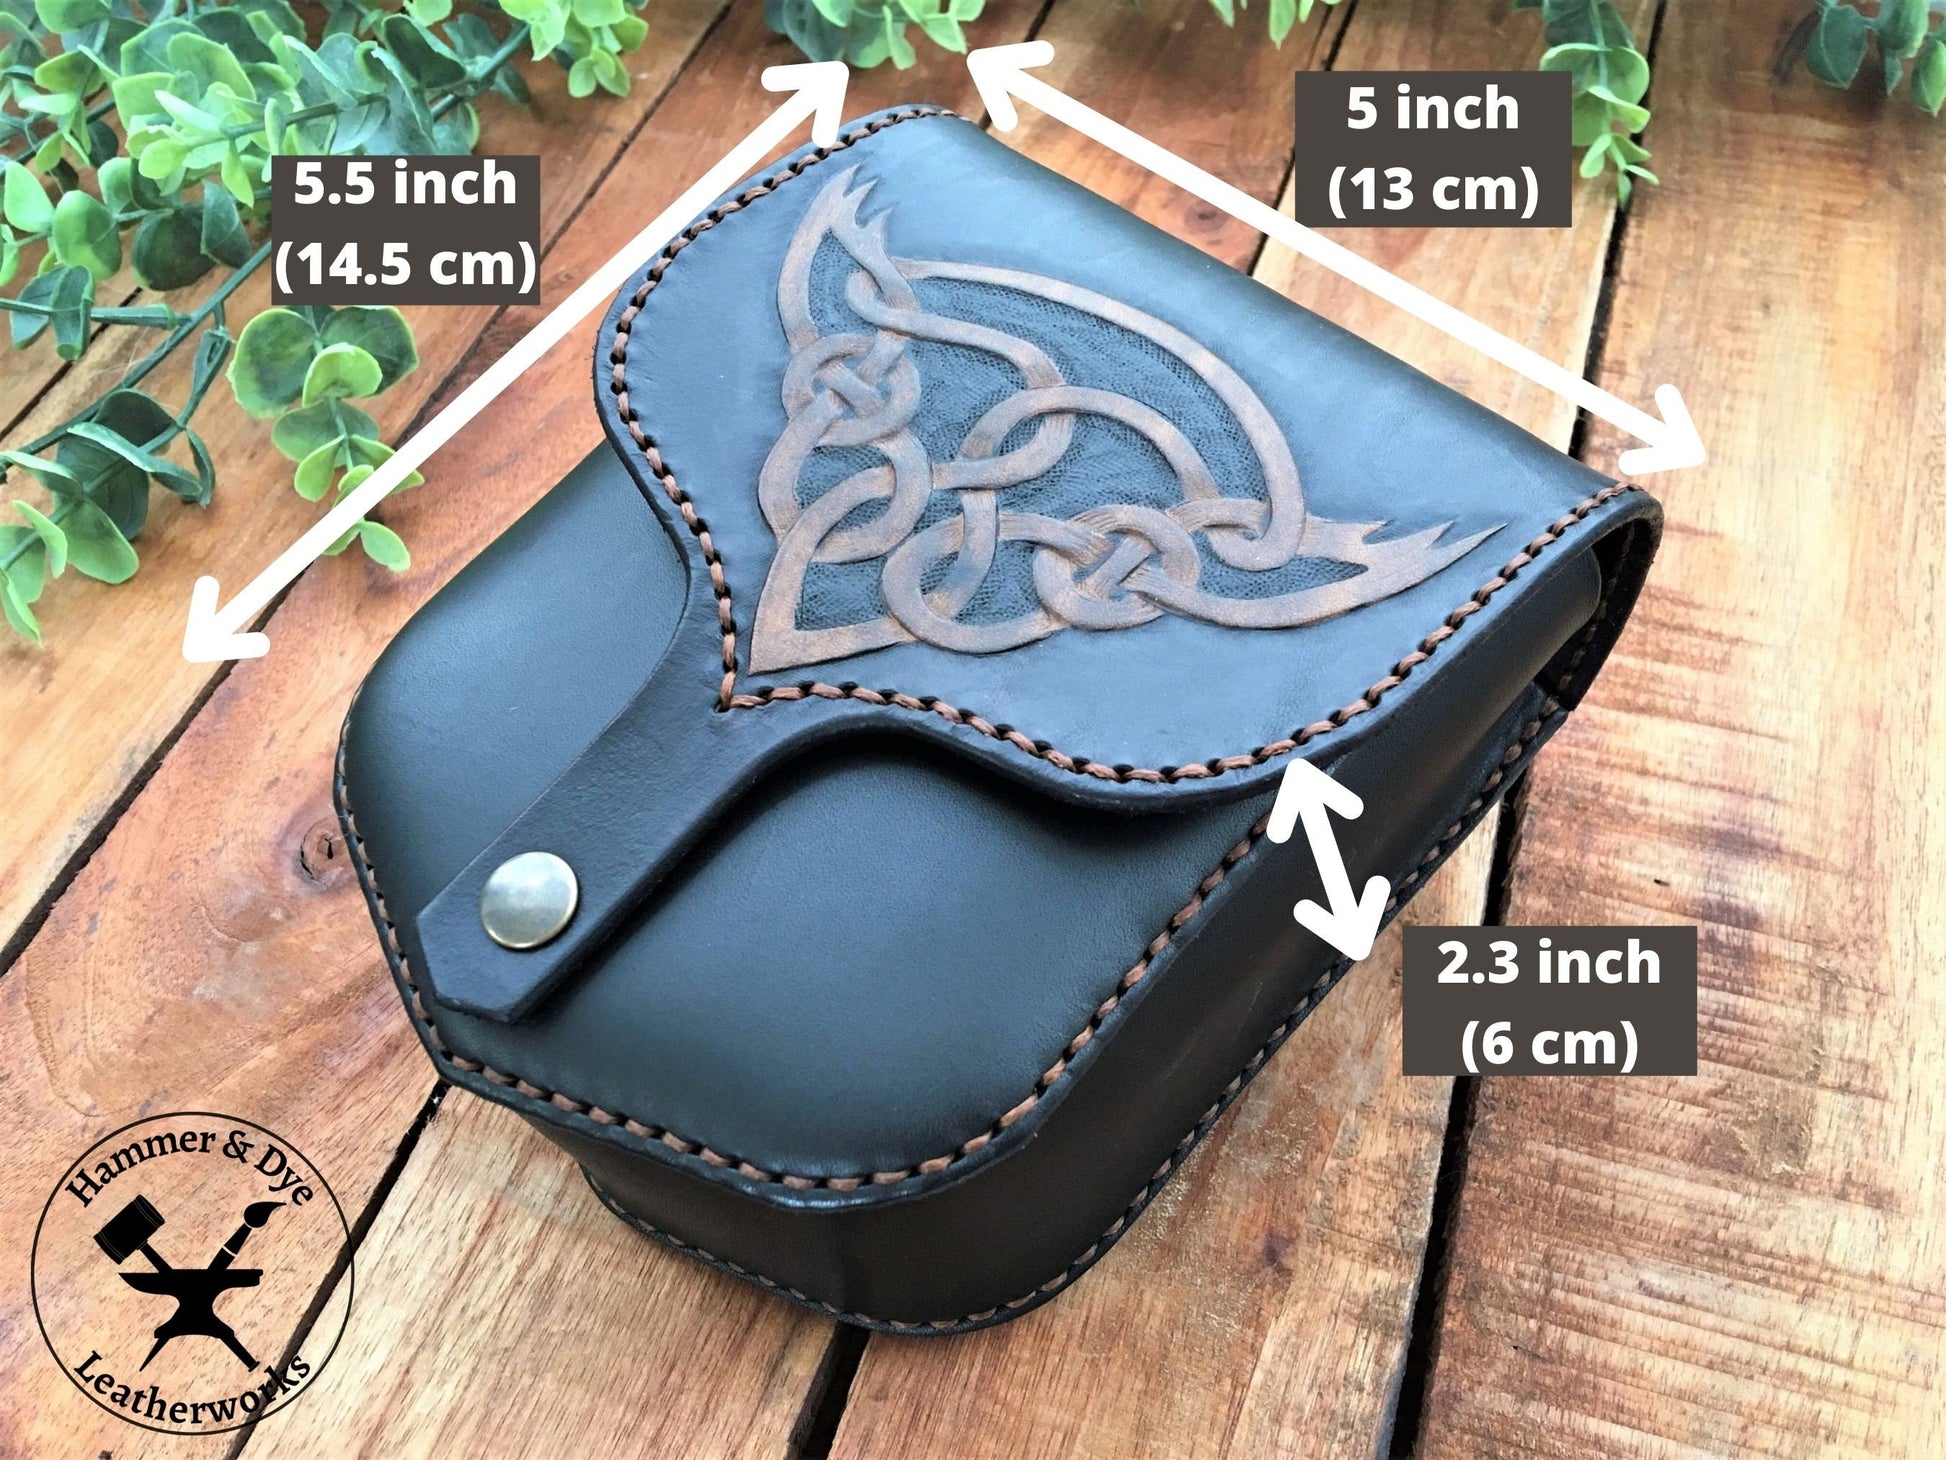 Handmade Black Leather Belt Pouch with Hand Carved Celtic Knotwork Design with a Sizing Guide